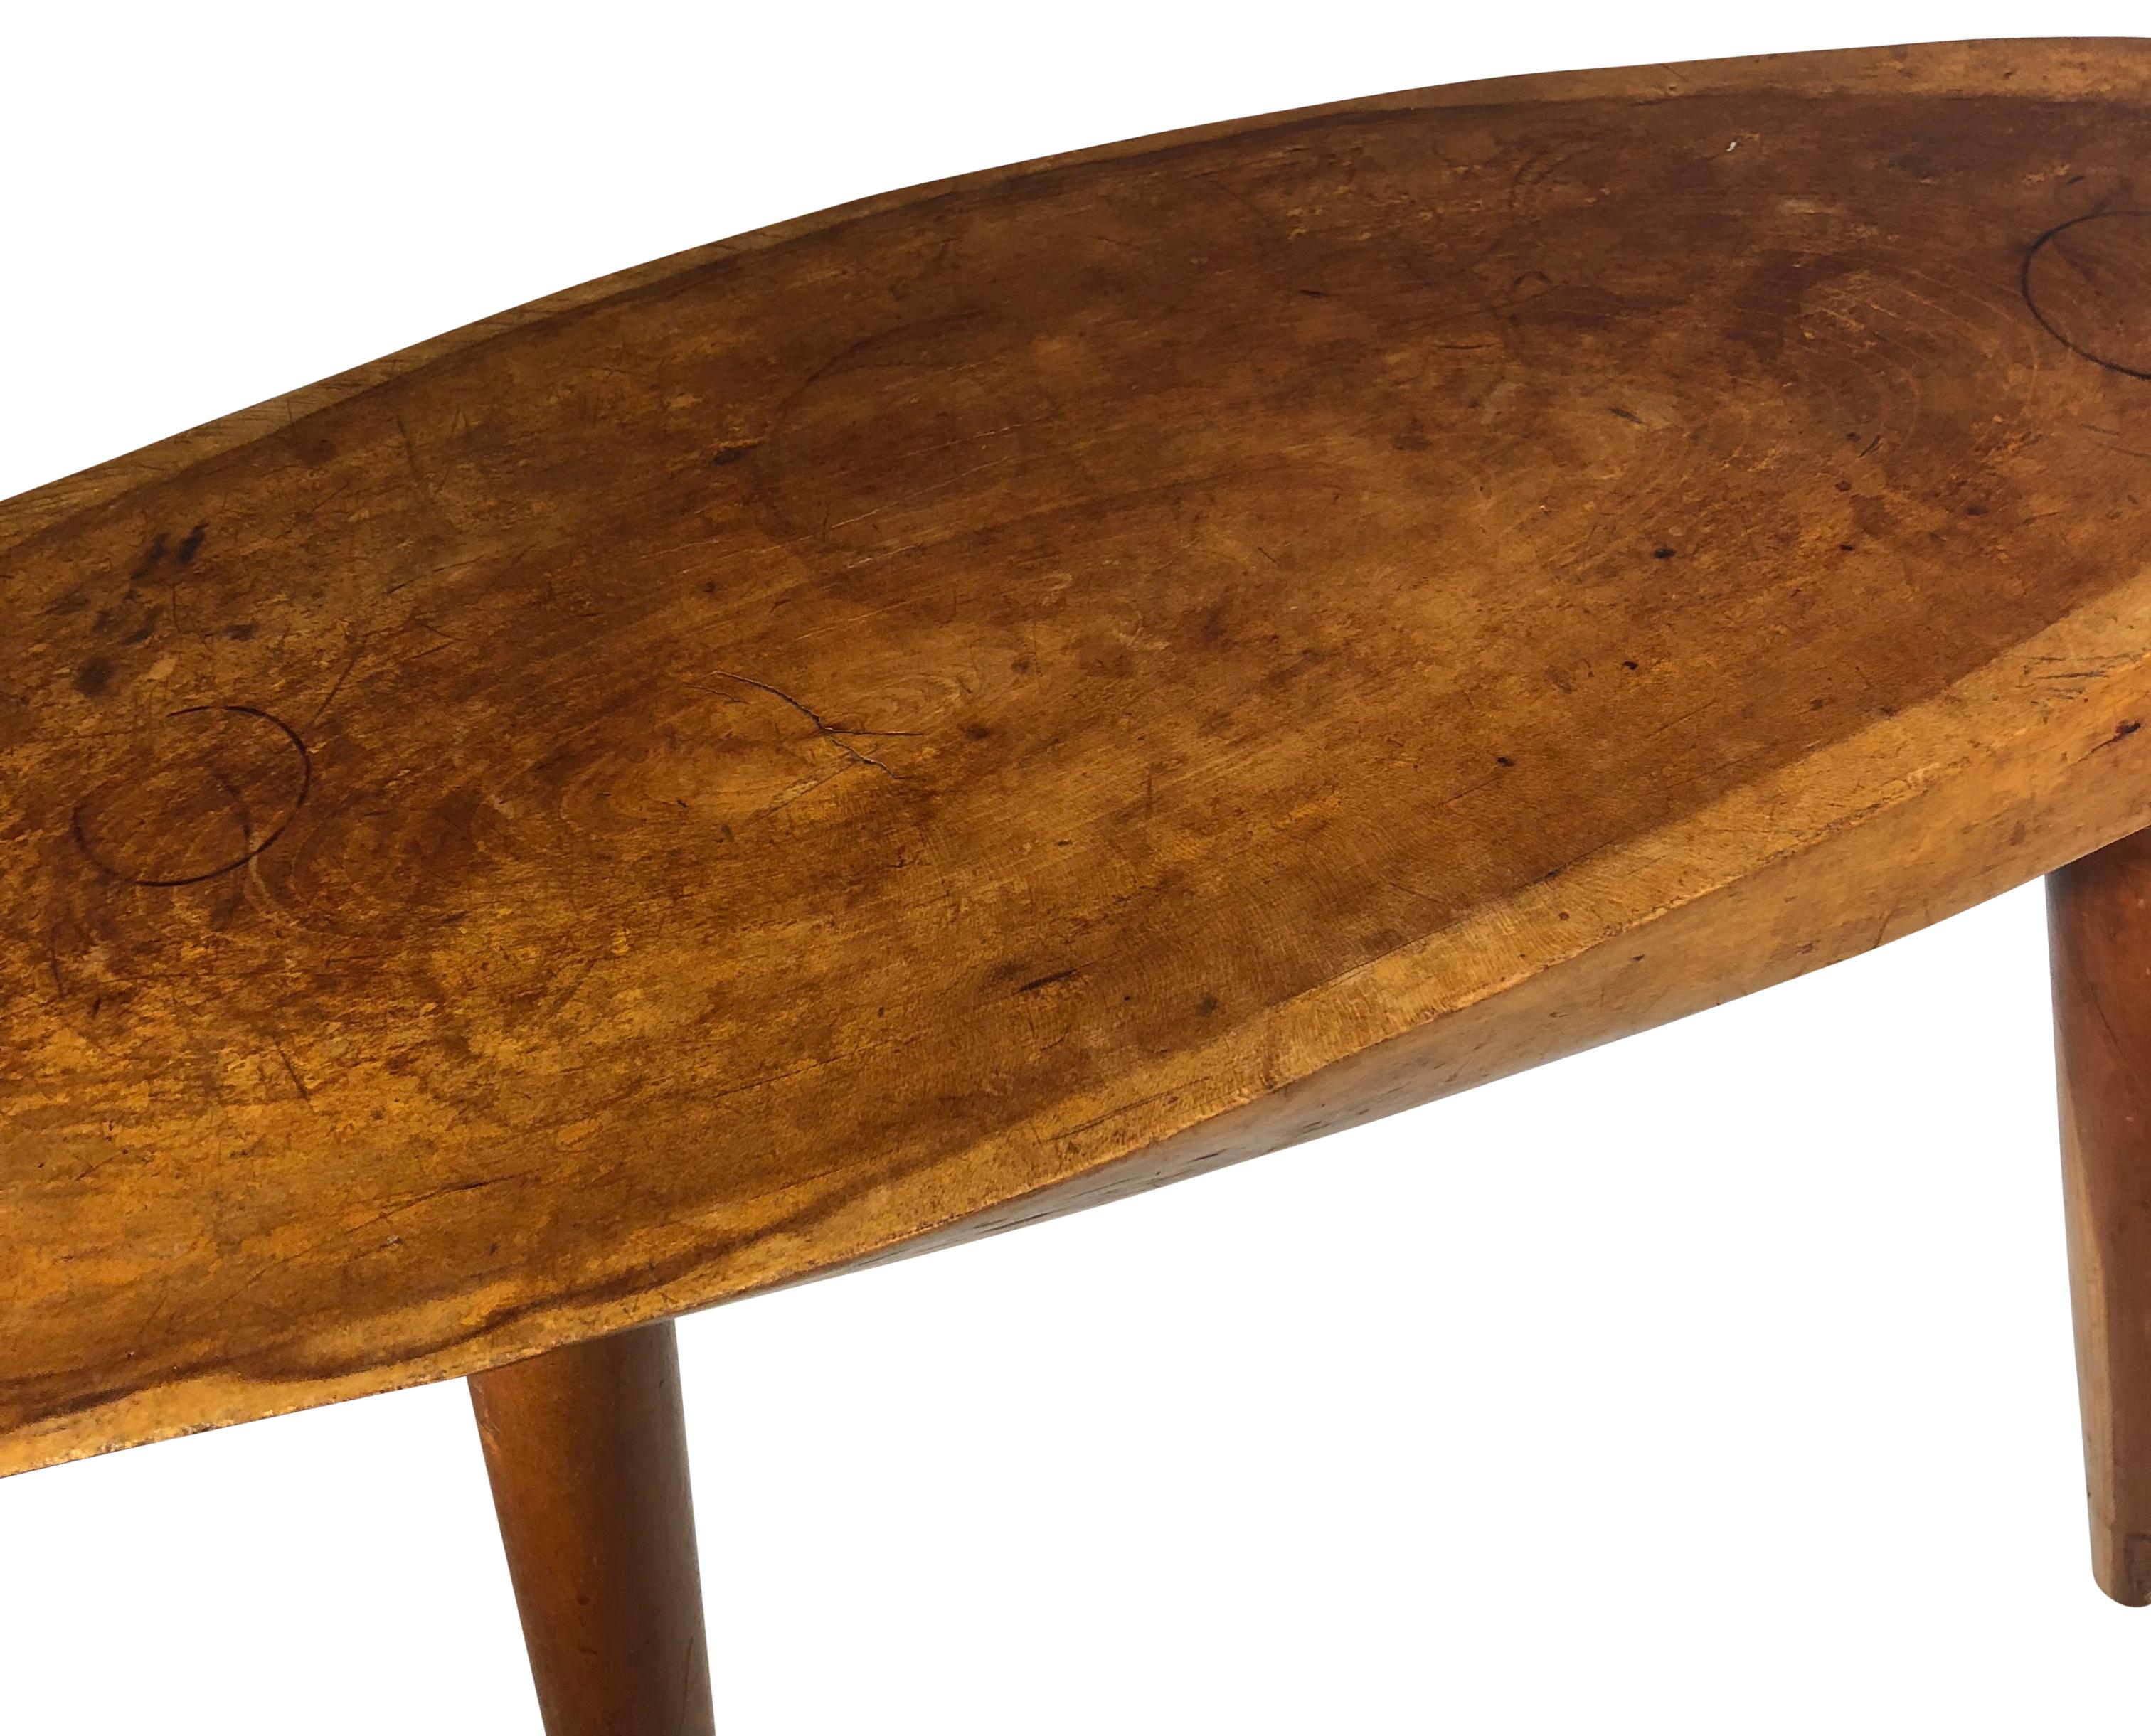 Hand-Crafted Four Legged Free Edge Cocktail Table By Roy Sheldon